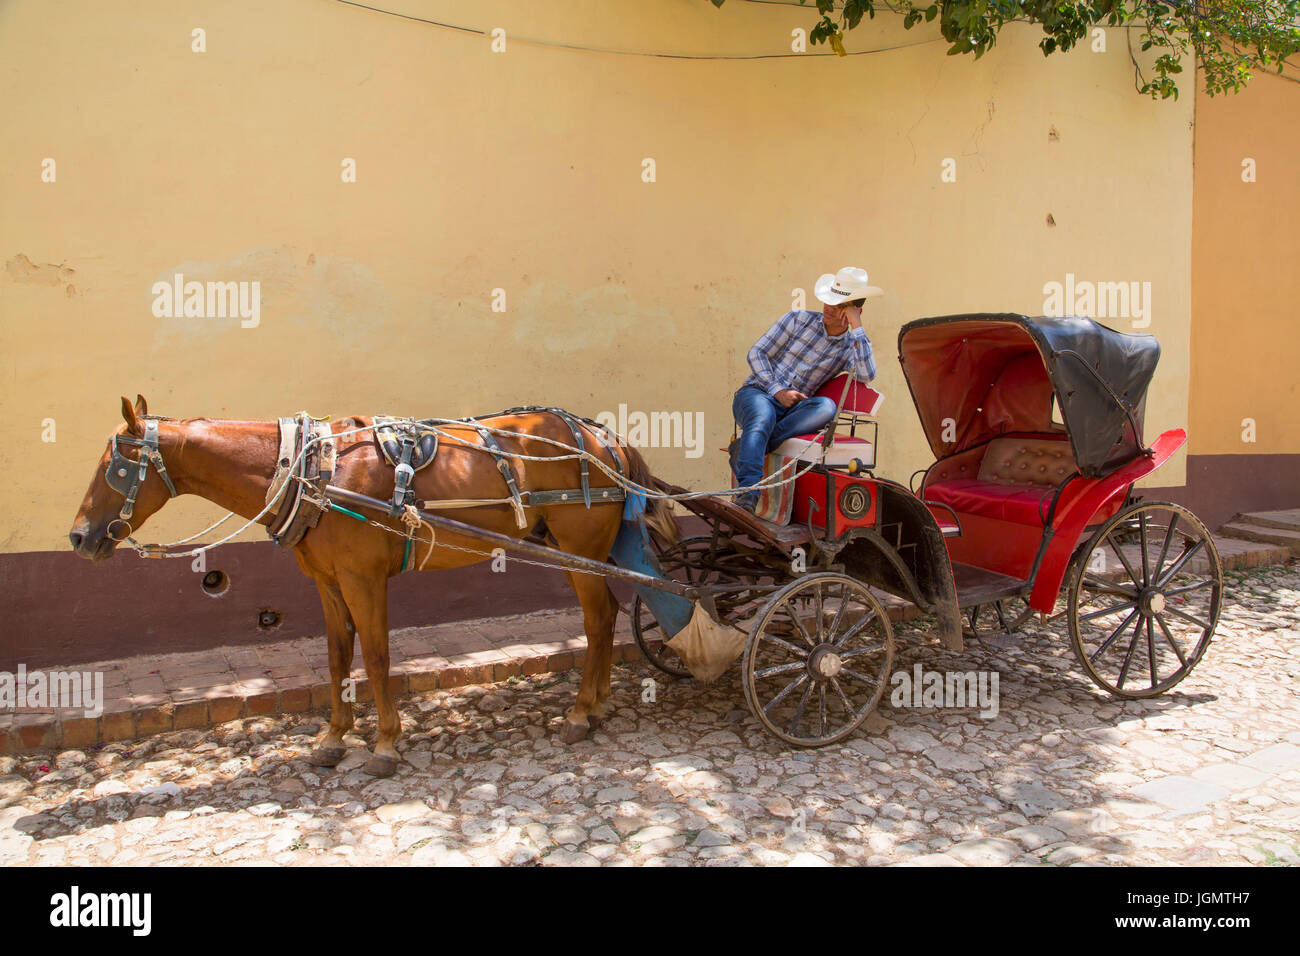 Relaxed Man with his Horse Driven Carriage, Trinidad, UNESCO World Heritage Site, Sancti Spiritus, Cuba Stock Photo